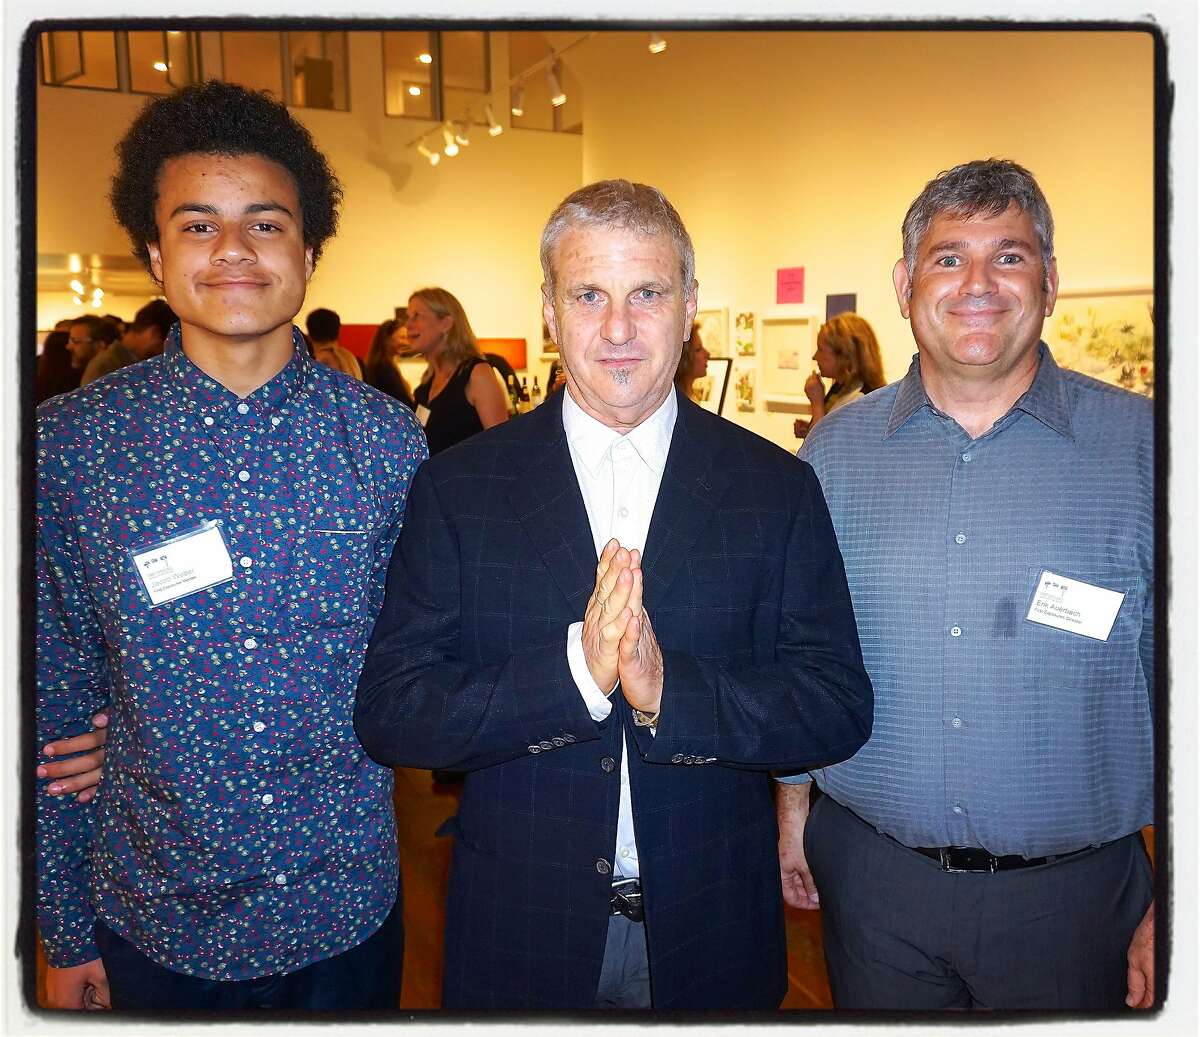 First Exposures mentee Jacob Weber (left) with photographer Jim Goldman and Executive Director Erik Auerbach at Root Division Gallery. Nov 2015.